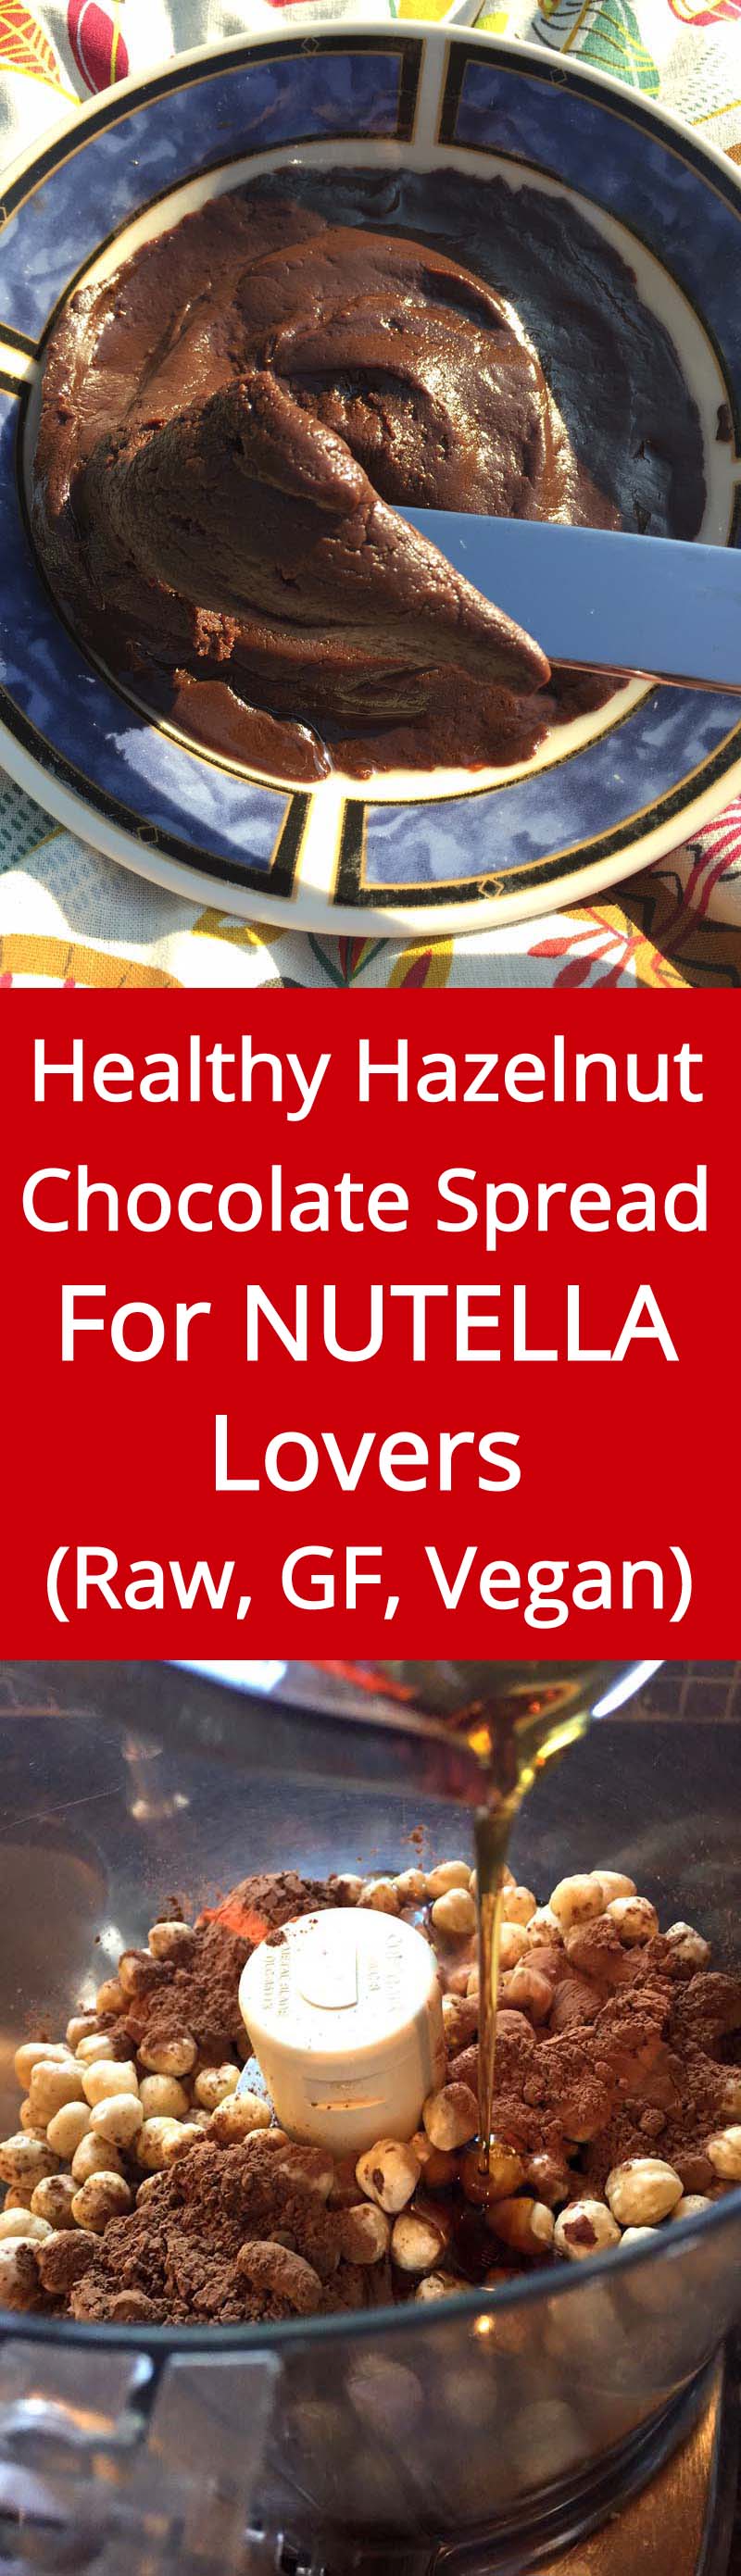 Healthy Homemade Nutella-like Recipe - AMAZING Chocolate Hazelnut Spread - raw, vegan, all-natural, with sugar-free option! If you love Nutella as much as I do, you NEED this recipe! | MelanieCooks.com